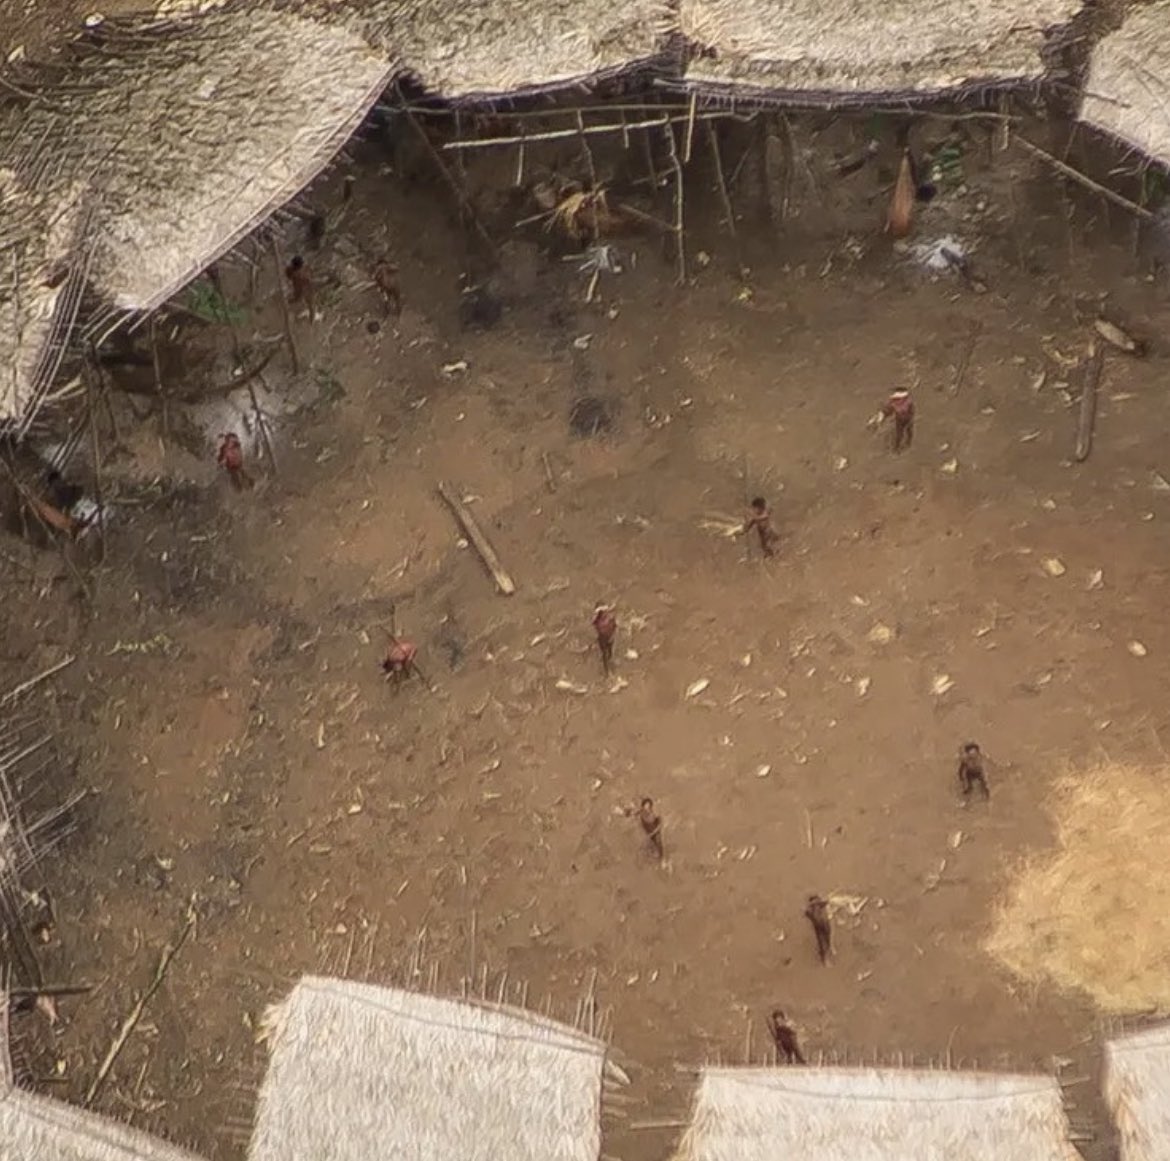 Captured above the Amazon rainforest, these incredible aerial photos show an uncontacted tribal community made of only 100 people.